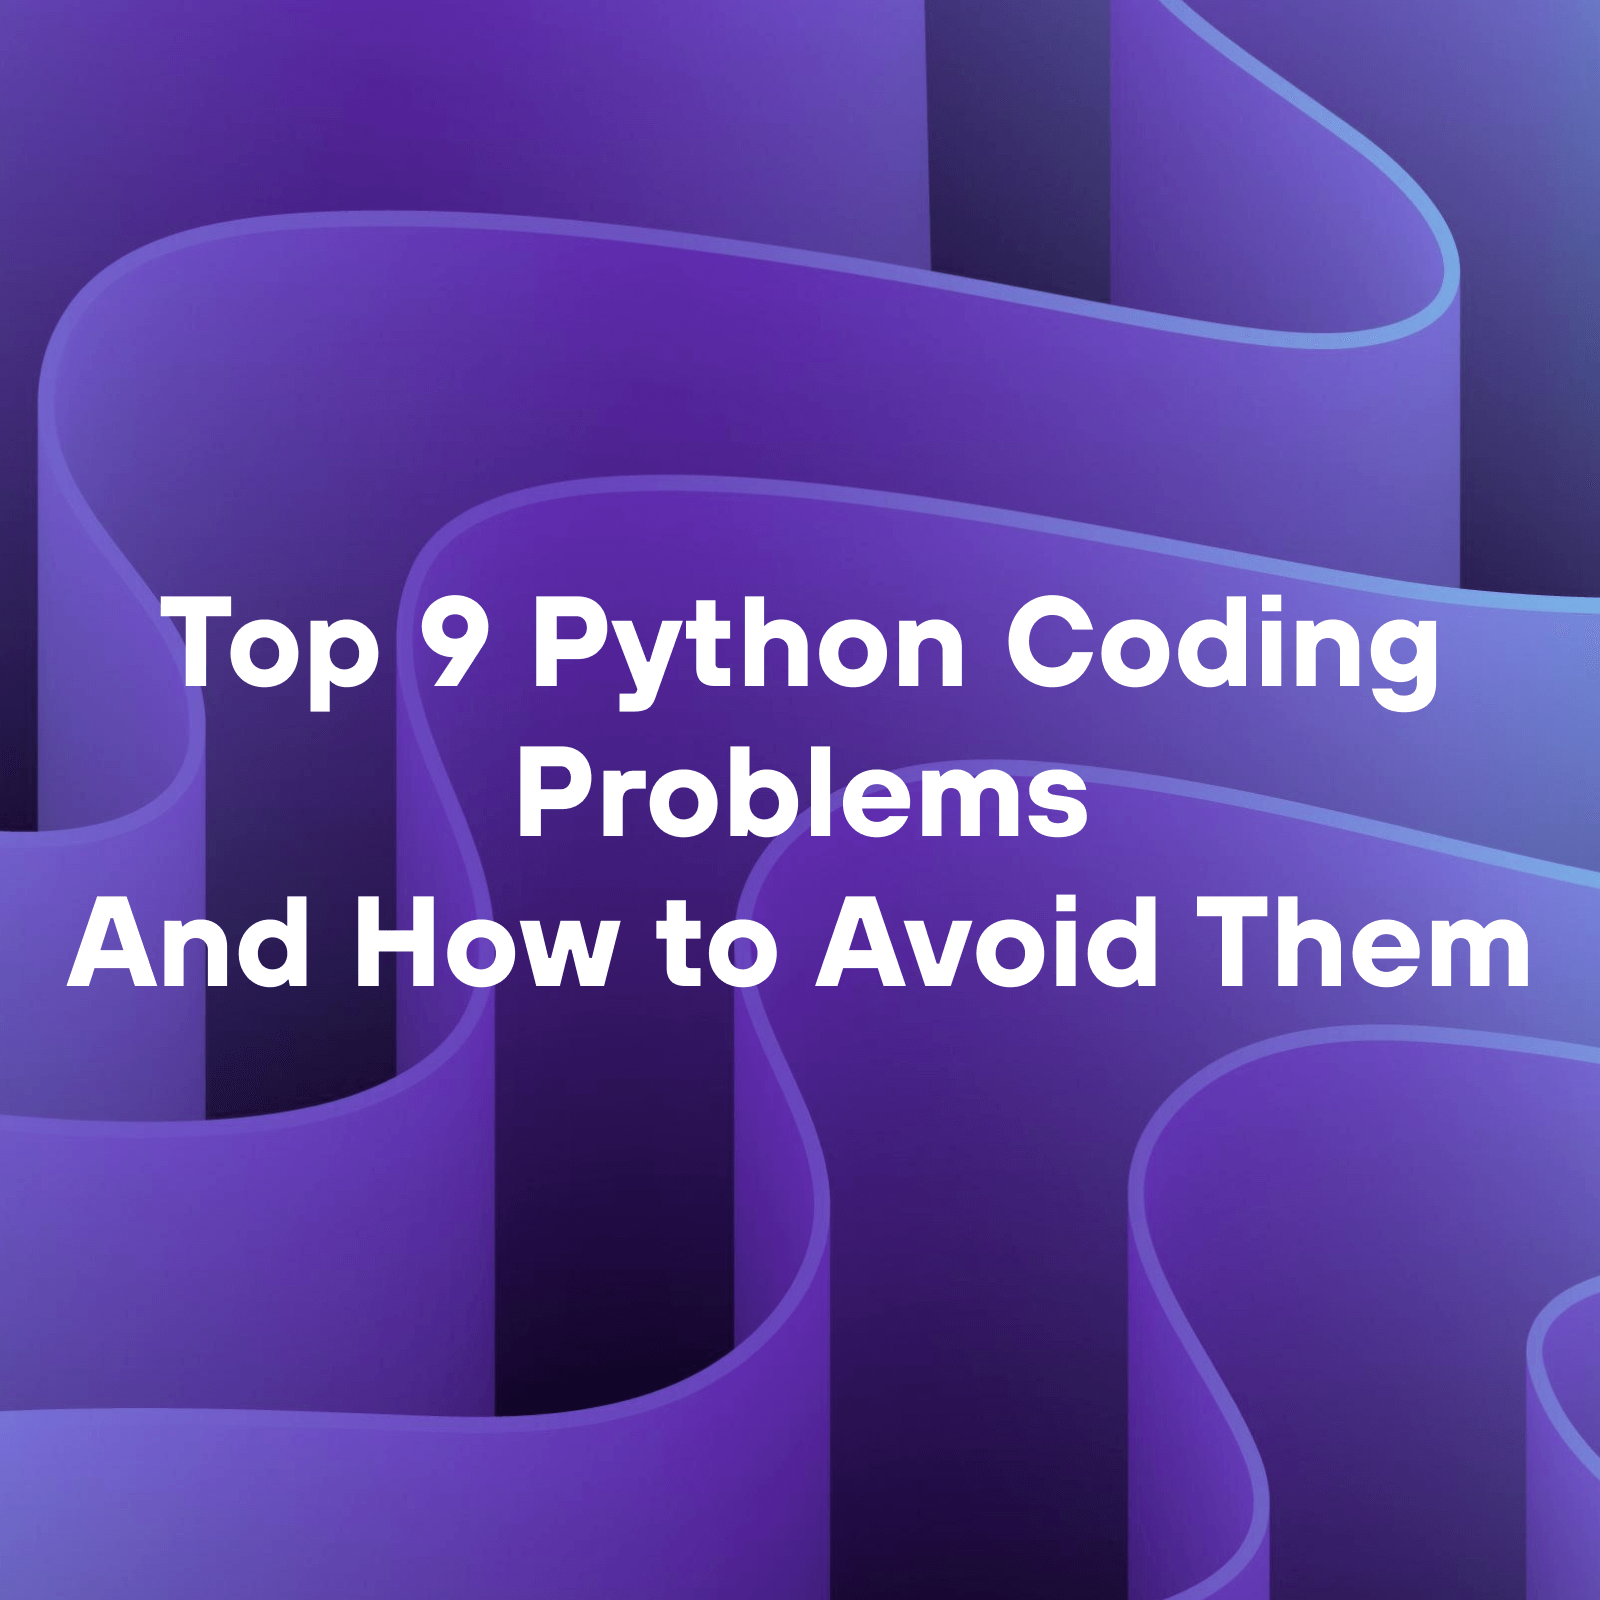 Top 9 Python Coding Problems and How to Avoid Them